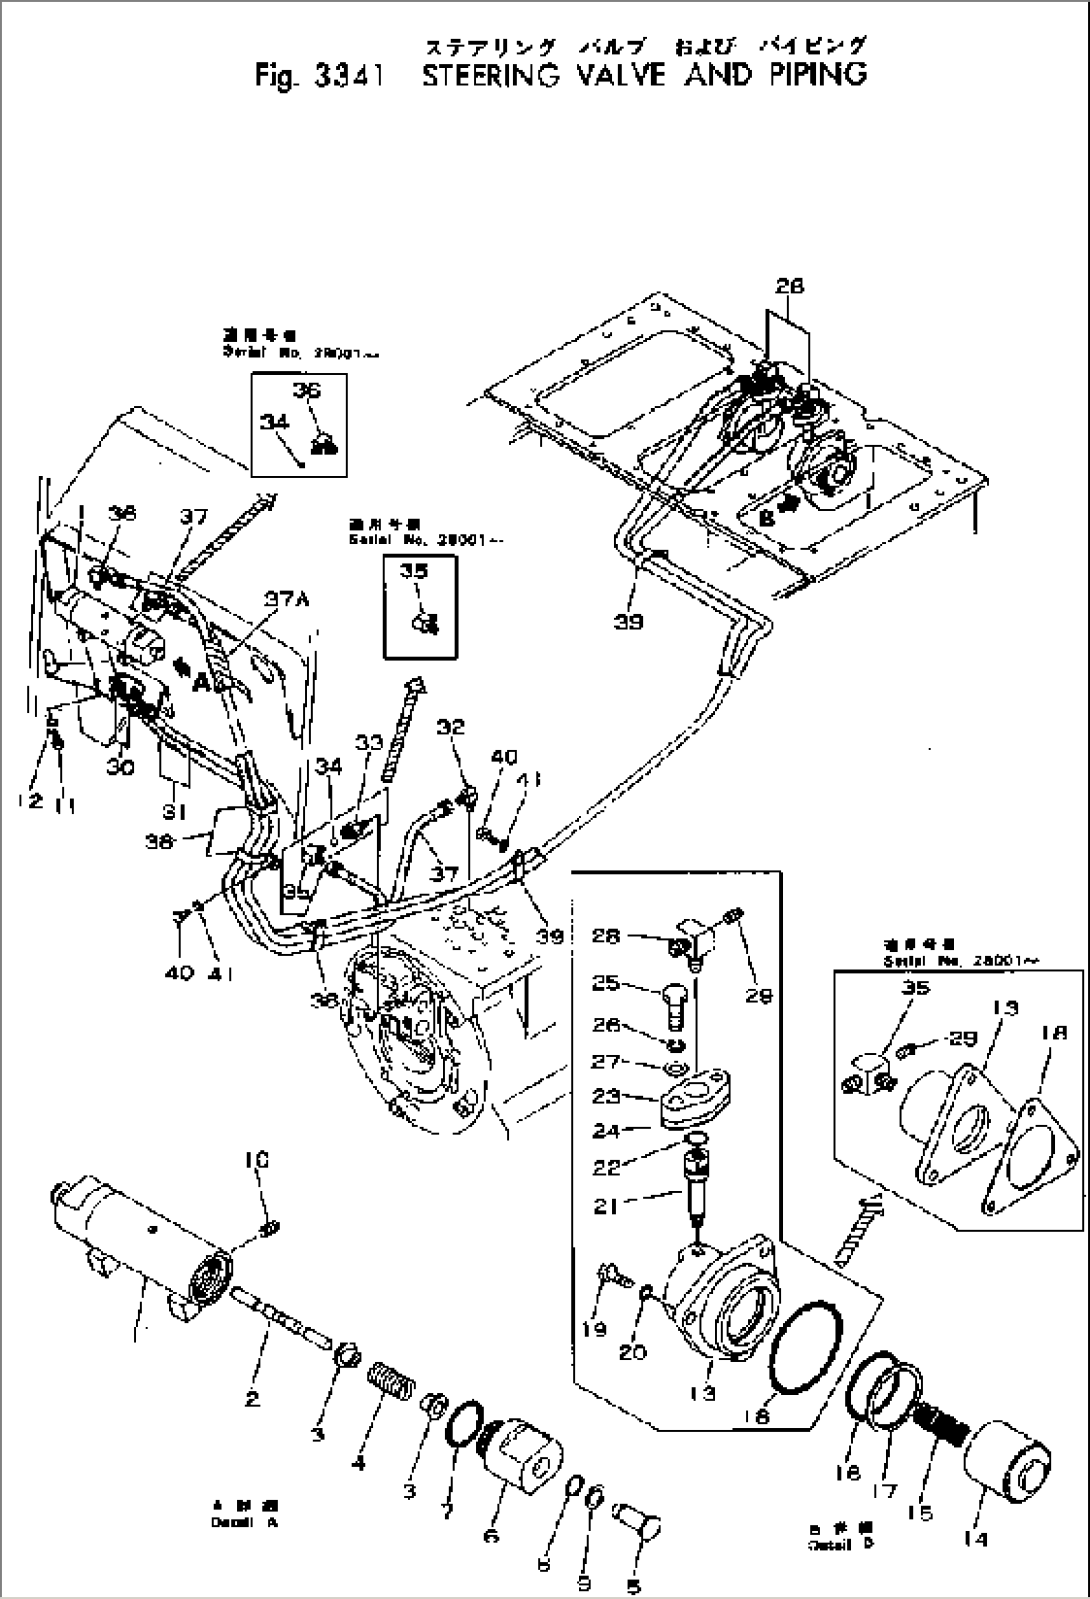 STEERING VALVE AND PIPING